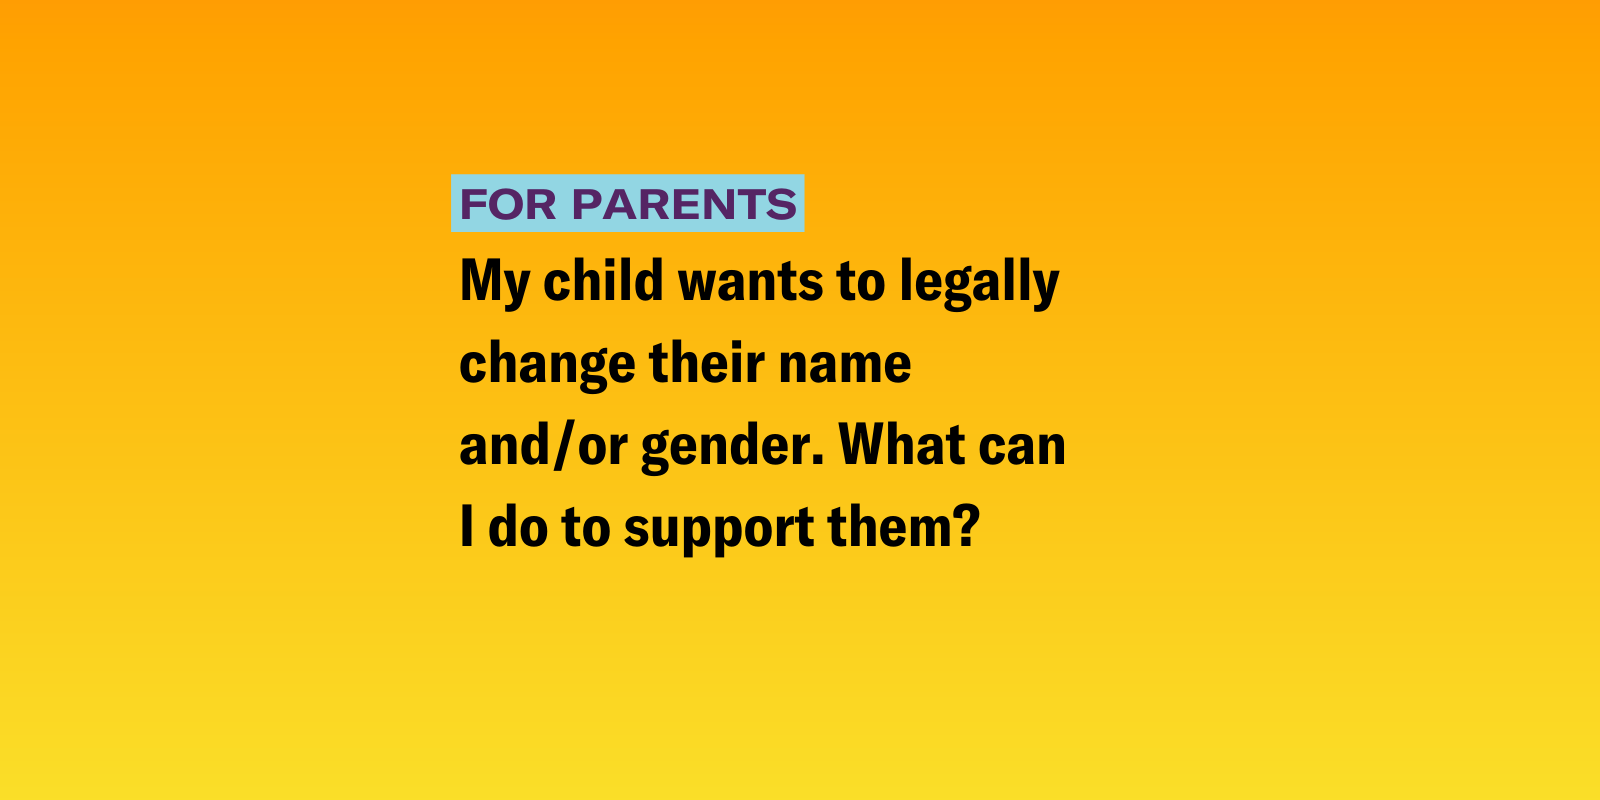 Gradient background of pink and azure blue with the text "My child wants to legally change their name and/or gender. What can I do to support them? "